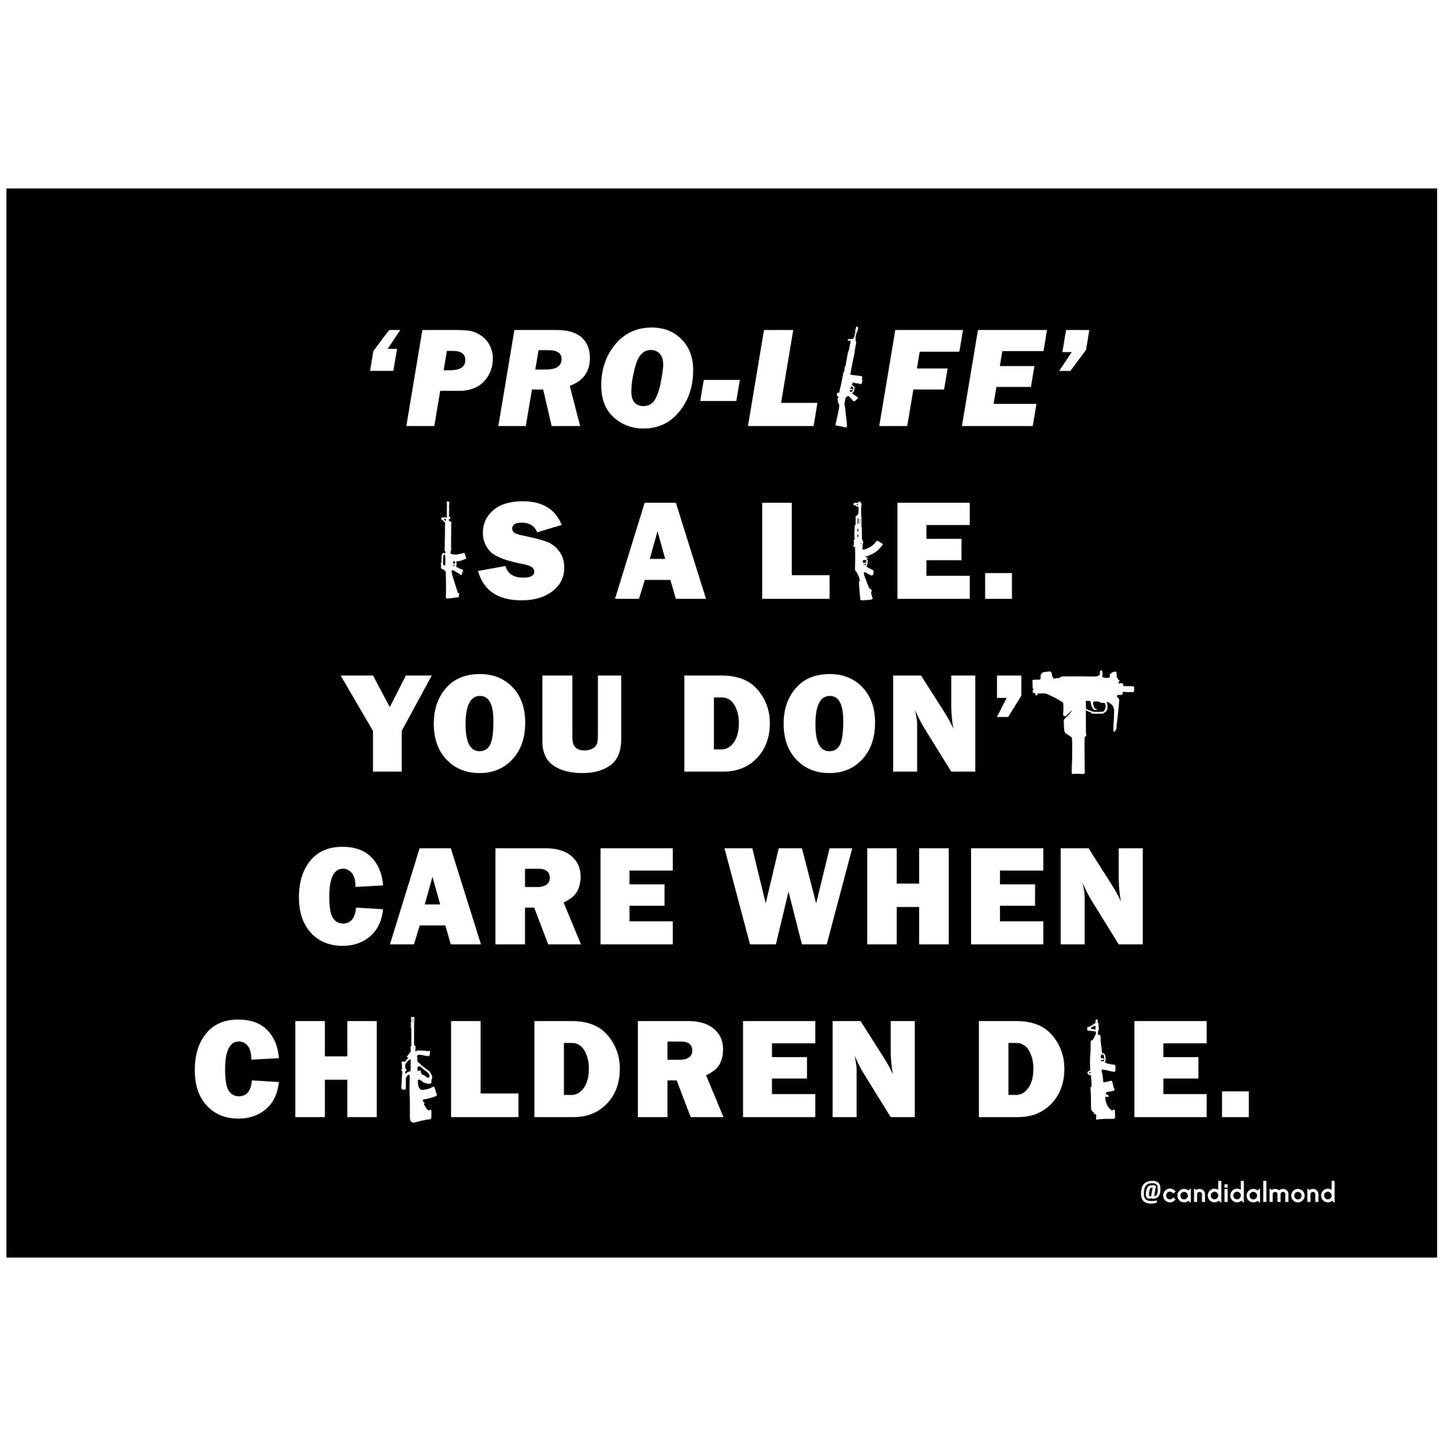 ''Pro-Life' Is A Lie. You Don't Care When Children Die.' FREE Digital Protest Poster